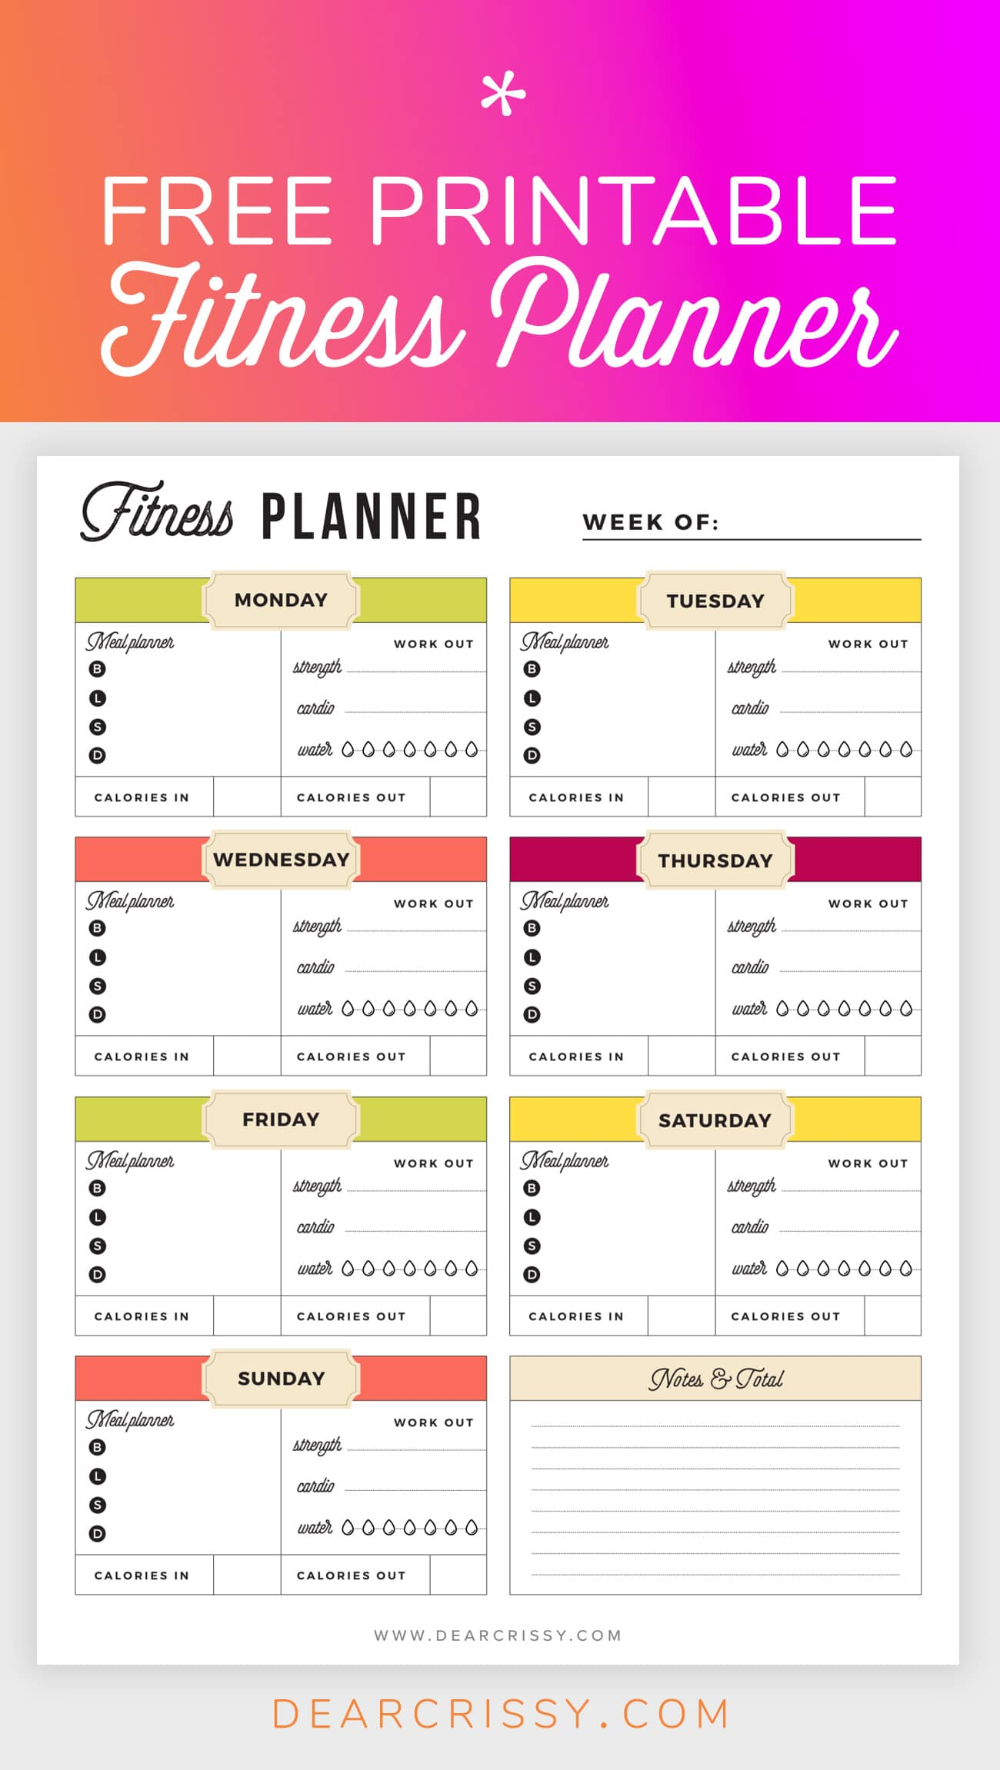 Free Printable Fitness Planner - Meal and Fitness Tracker, Start Today! - Free Printable Fitness Planner - Meal and Fitness Tracker, Start Today! -   13 fitness Planner inspiration ideas